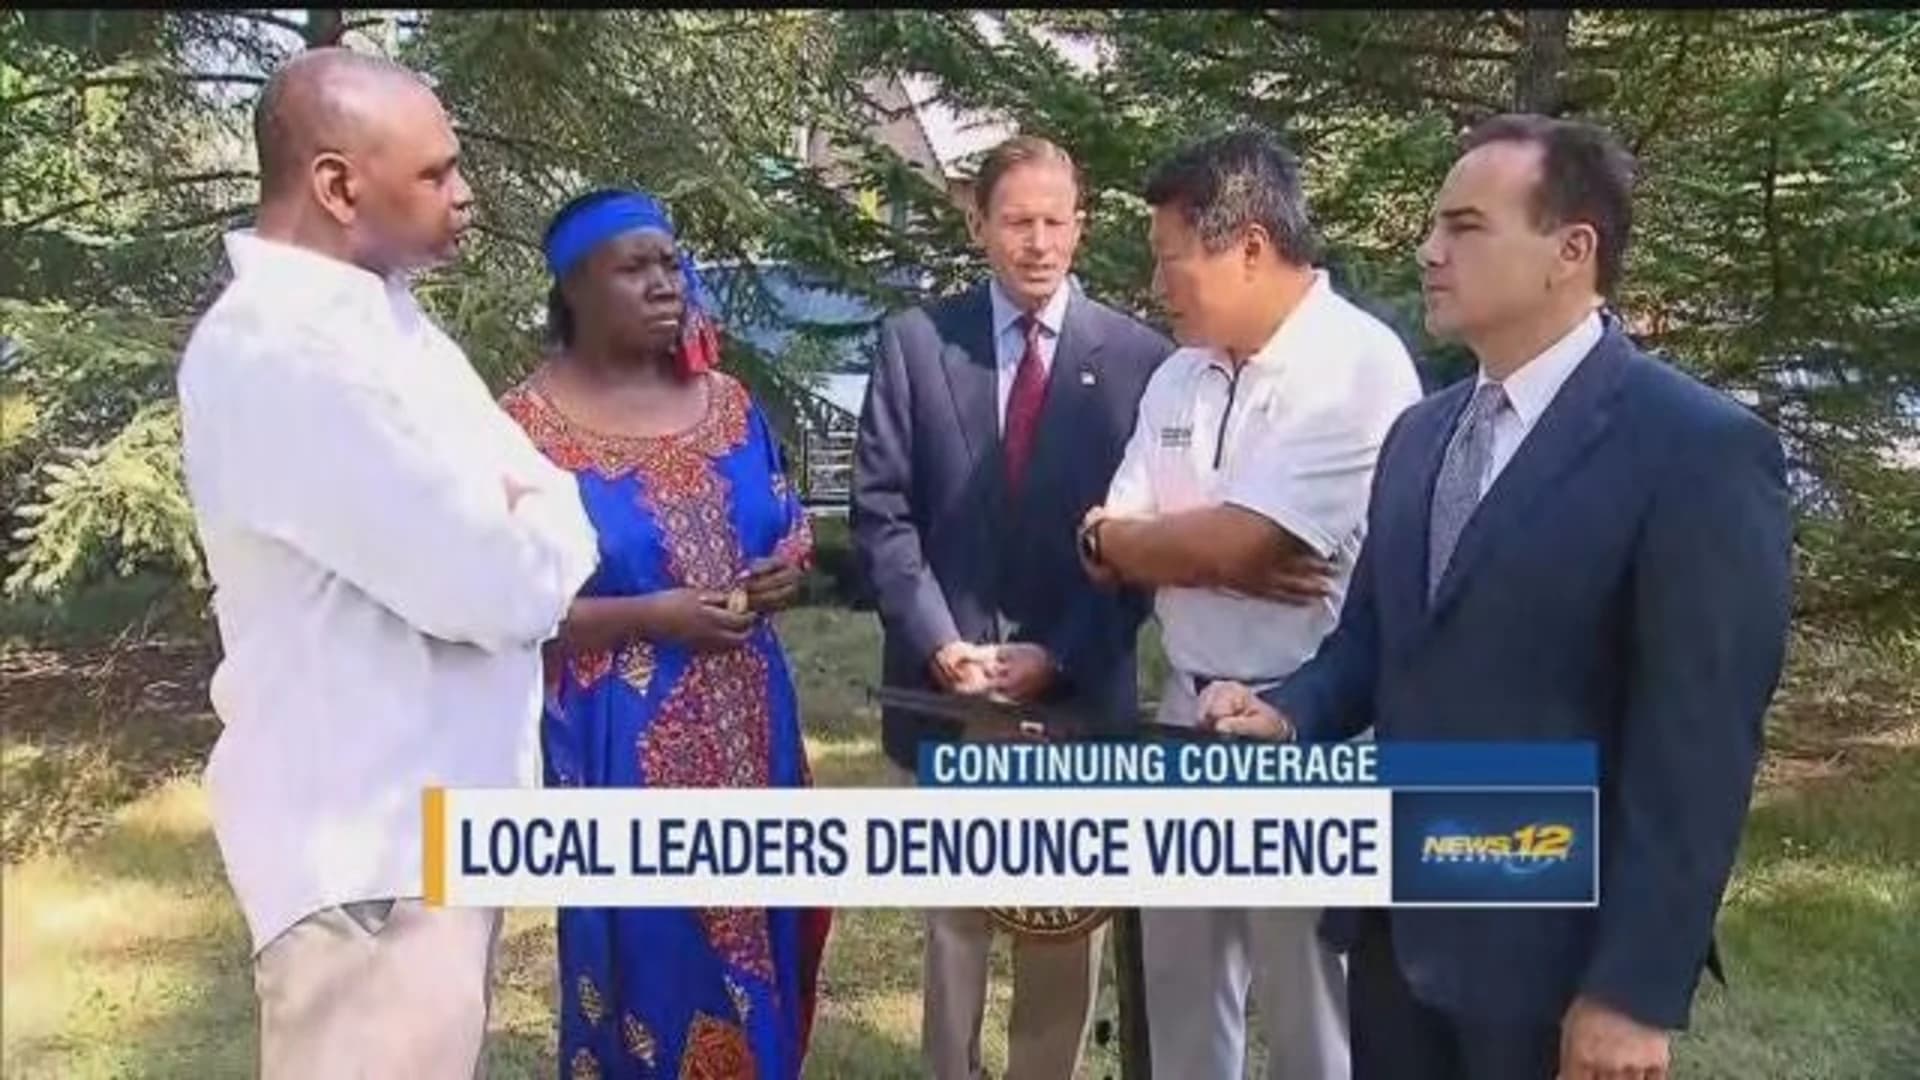 State and local leaders denounce violence in VA